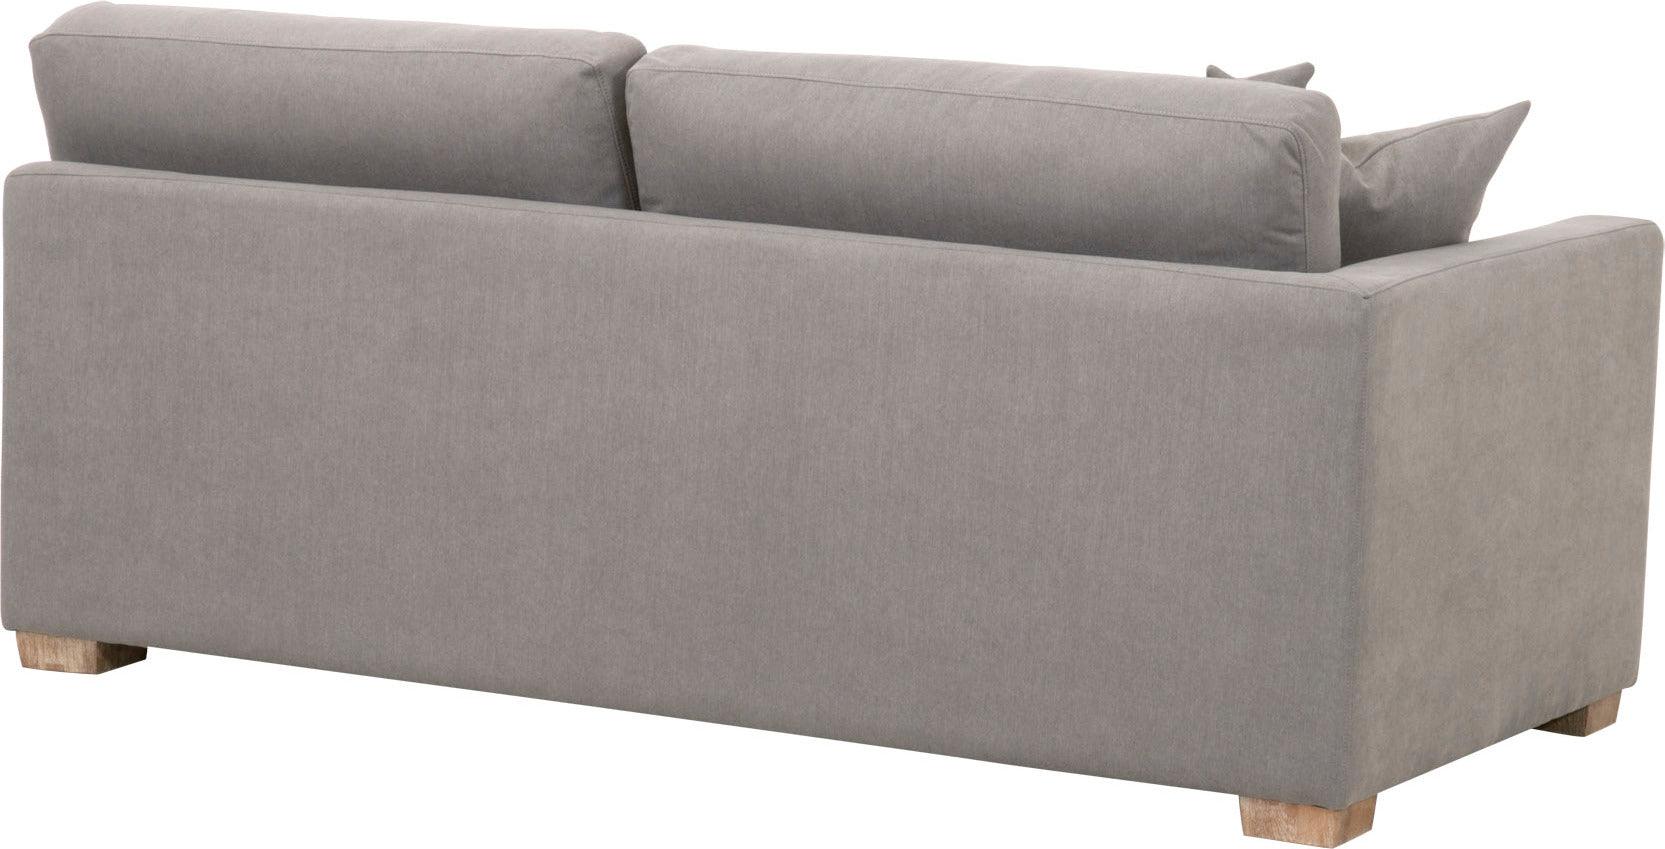 Essentials For Living Sofas & Couches - Hayden Modular Taper 2-Seat Left Arm Sofa Natural Gray Oak